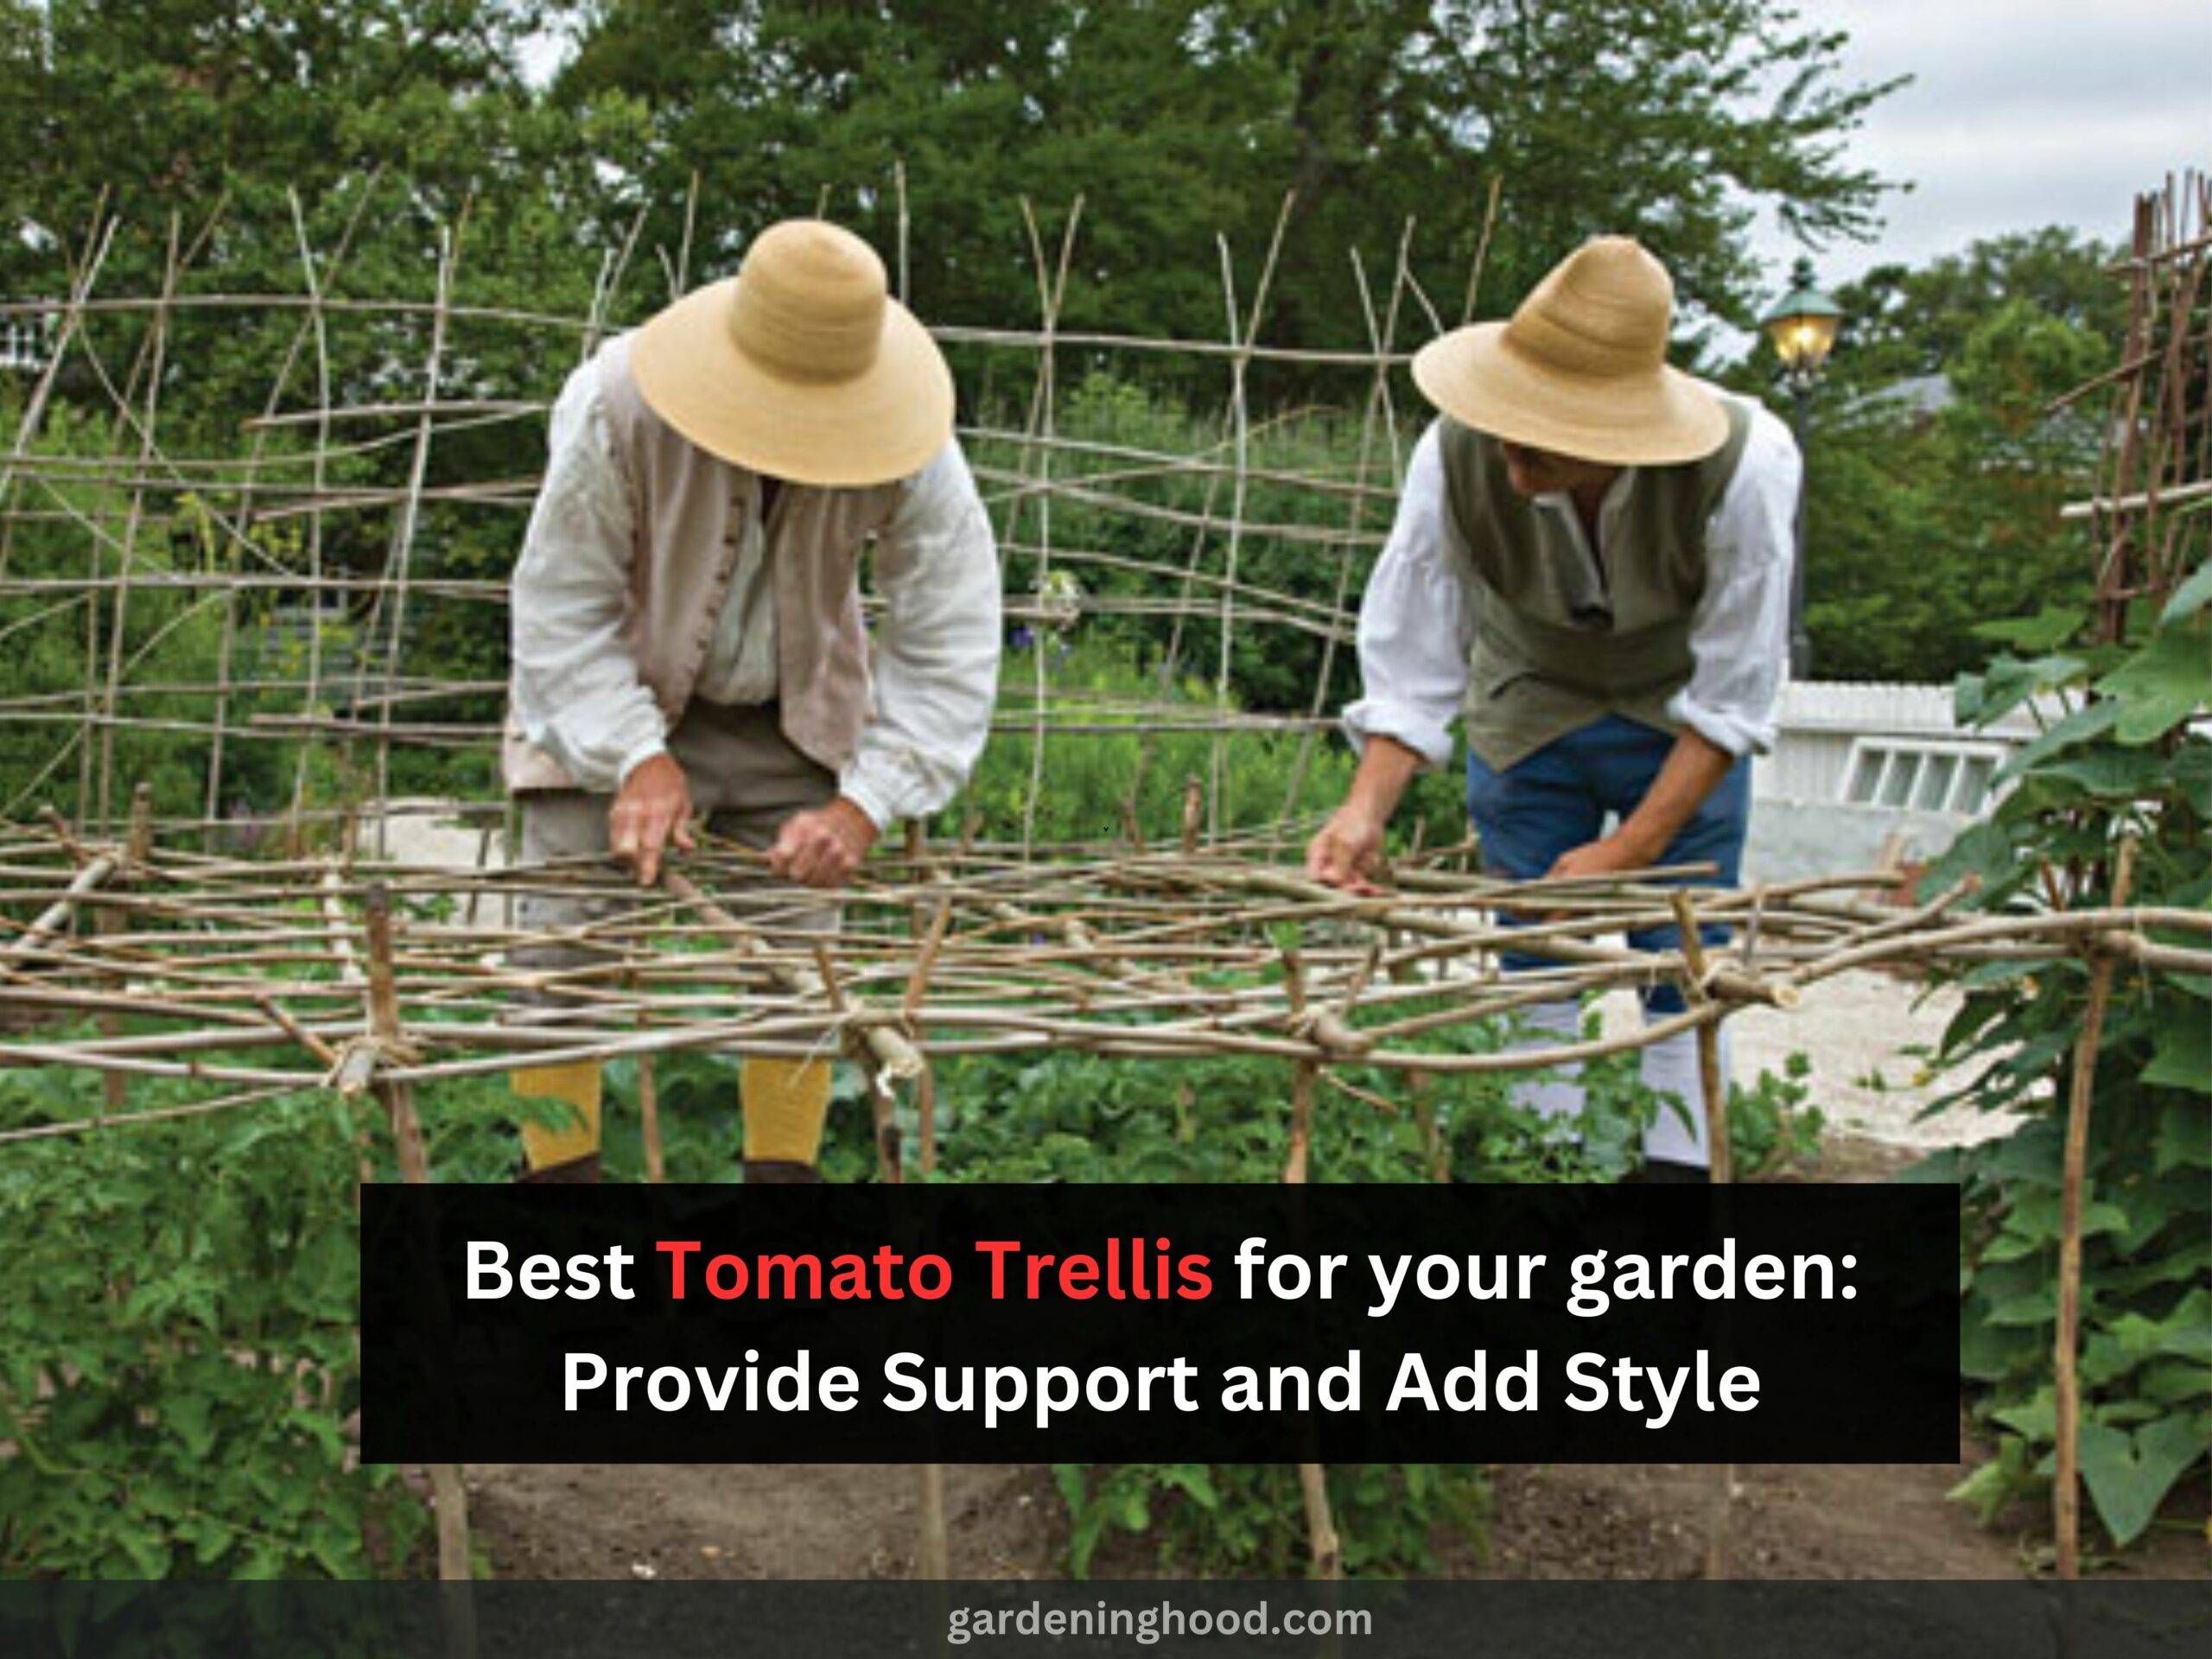 Best Tomato Trellis for your garden: Provide Support and Add Style